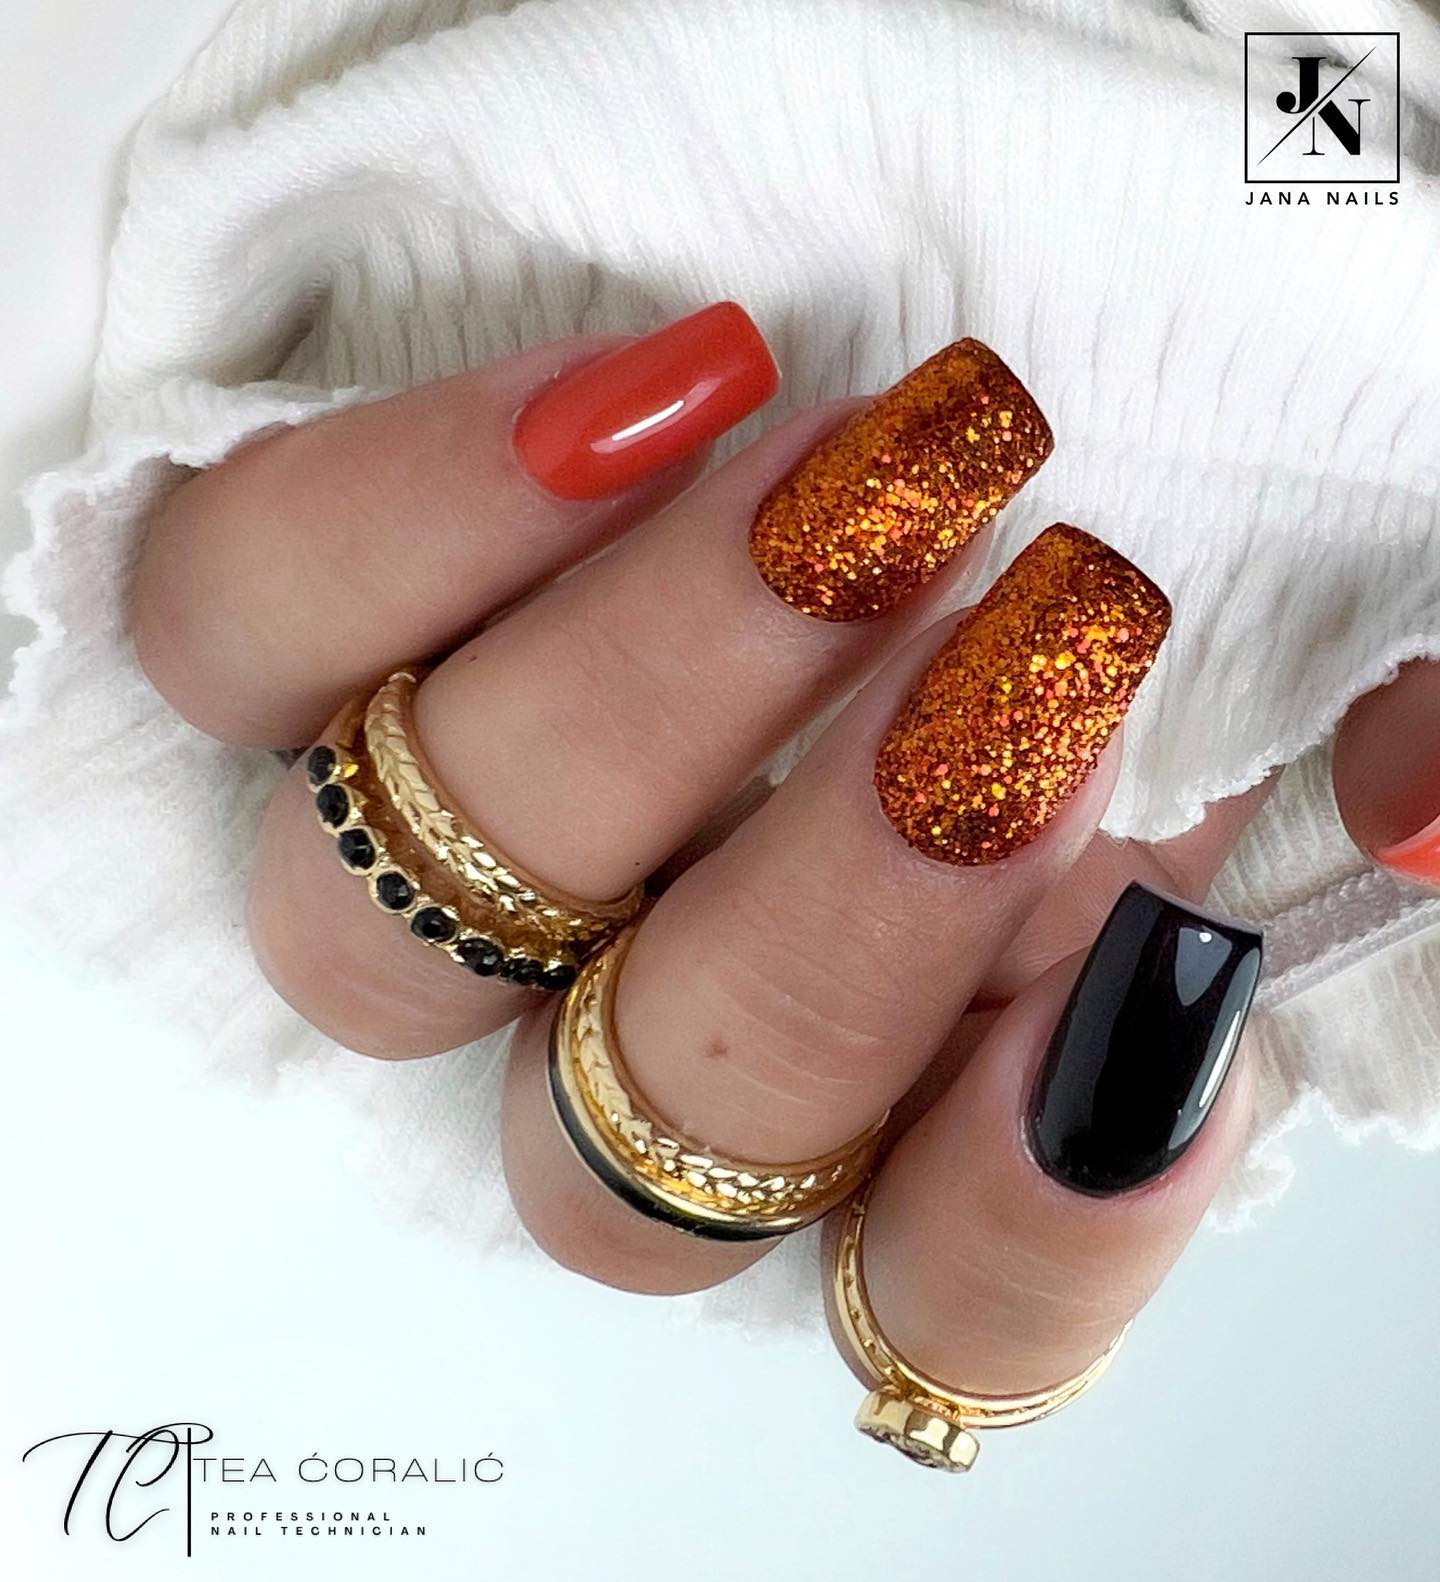 Dark orange is characterized with autumn, evoking a feeling of warmth and comfort. Let's use this beautiful color for your accent nails and cover it with glitters to stand out!